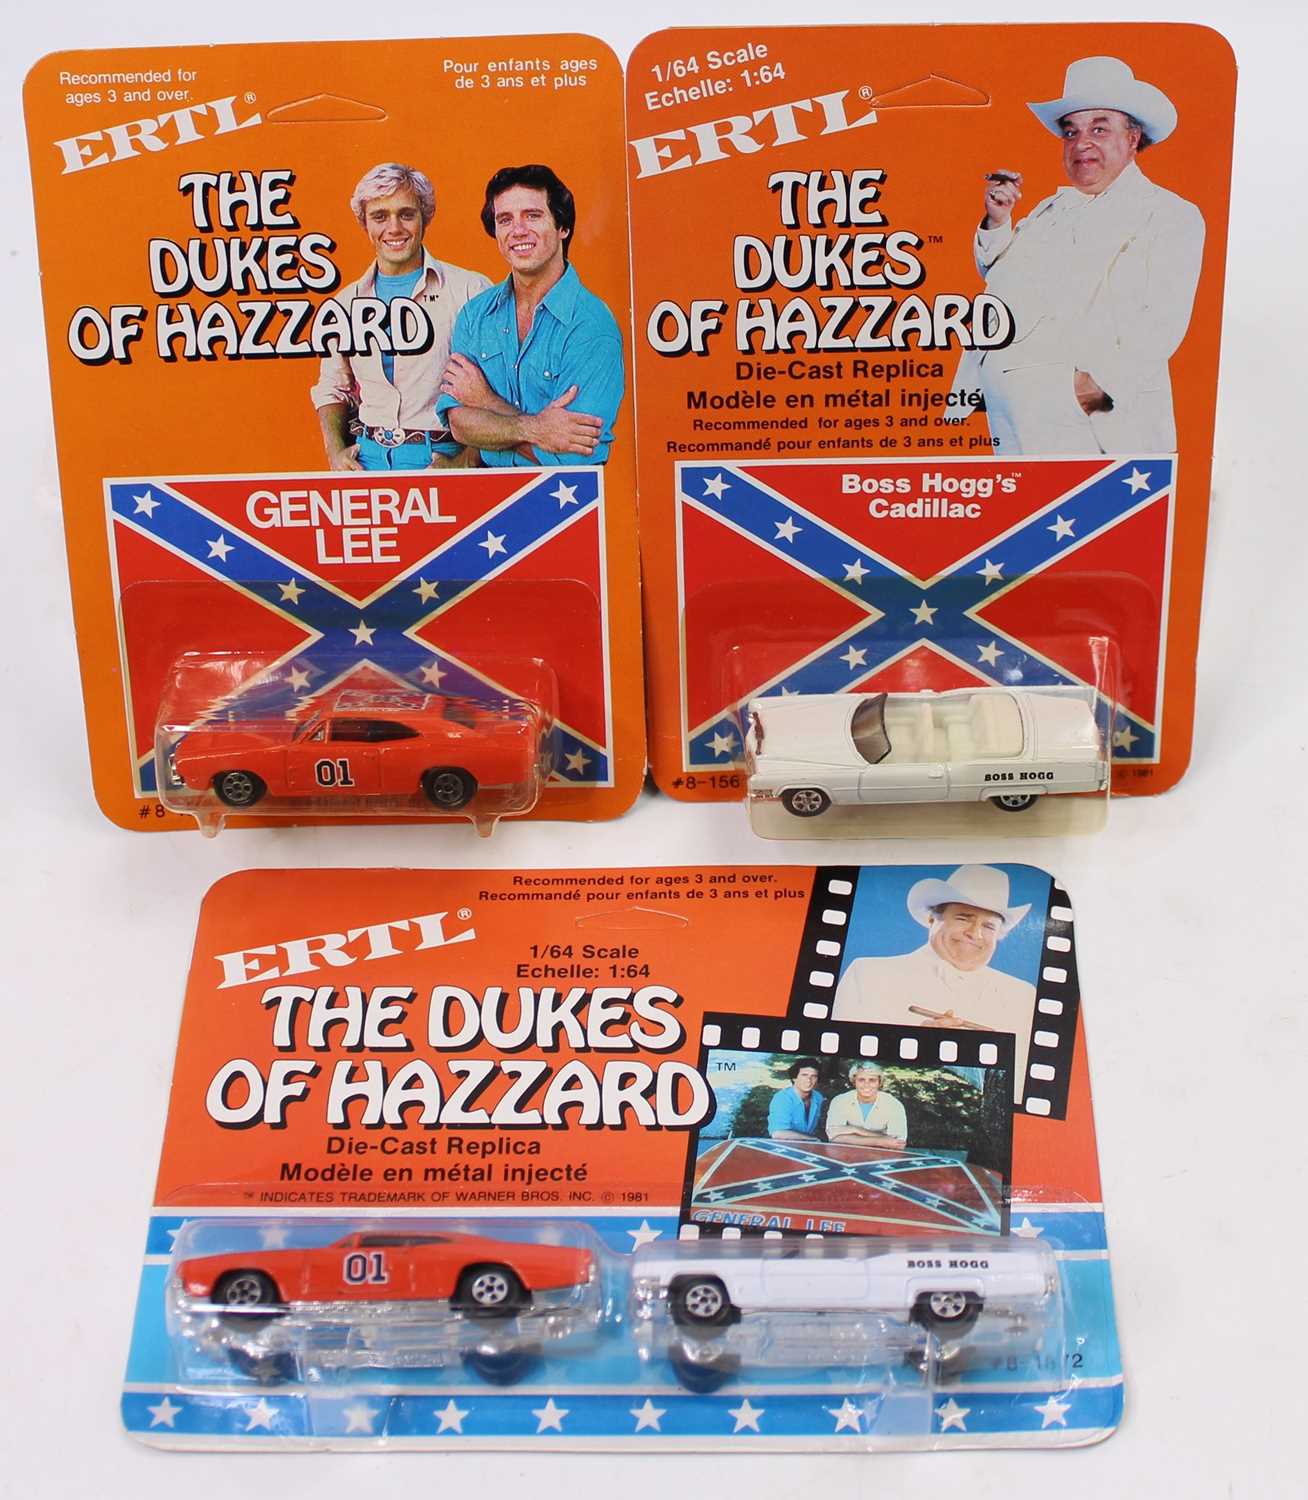 ERTL "The Dukes Of Hazzard" collection comprising The General Lee Dodge Charger and Boss Hogg's